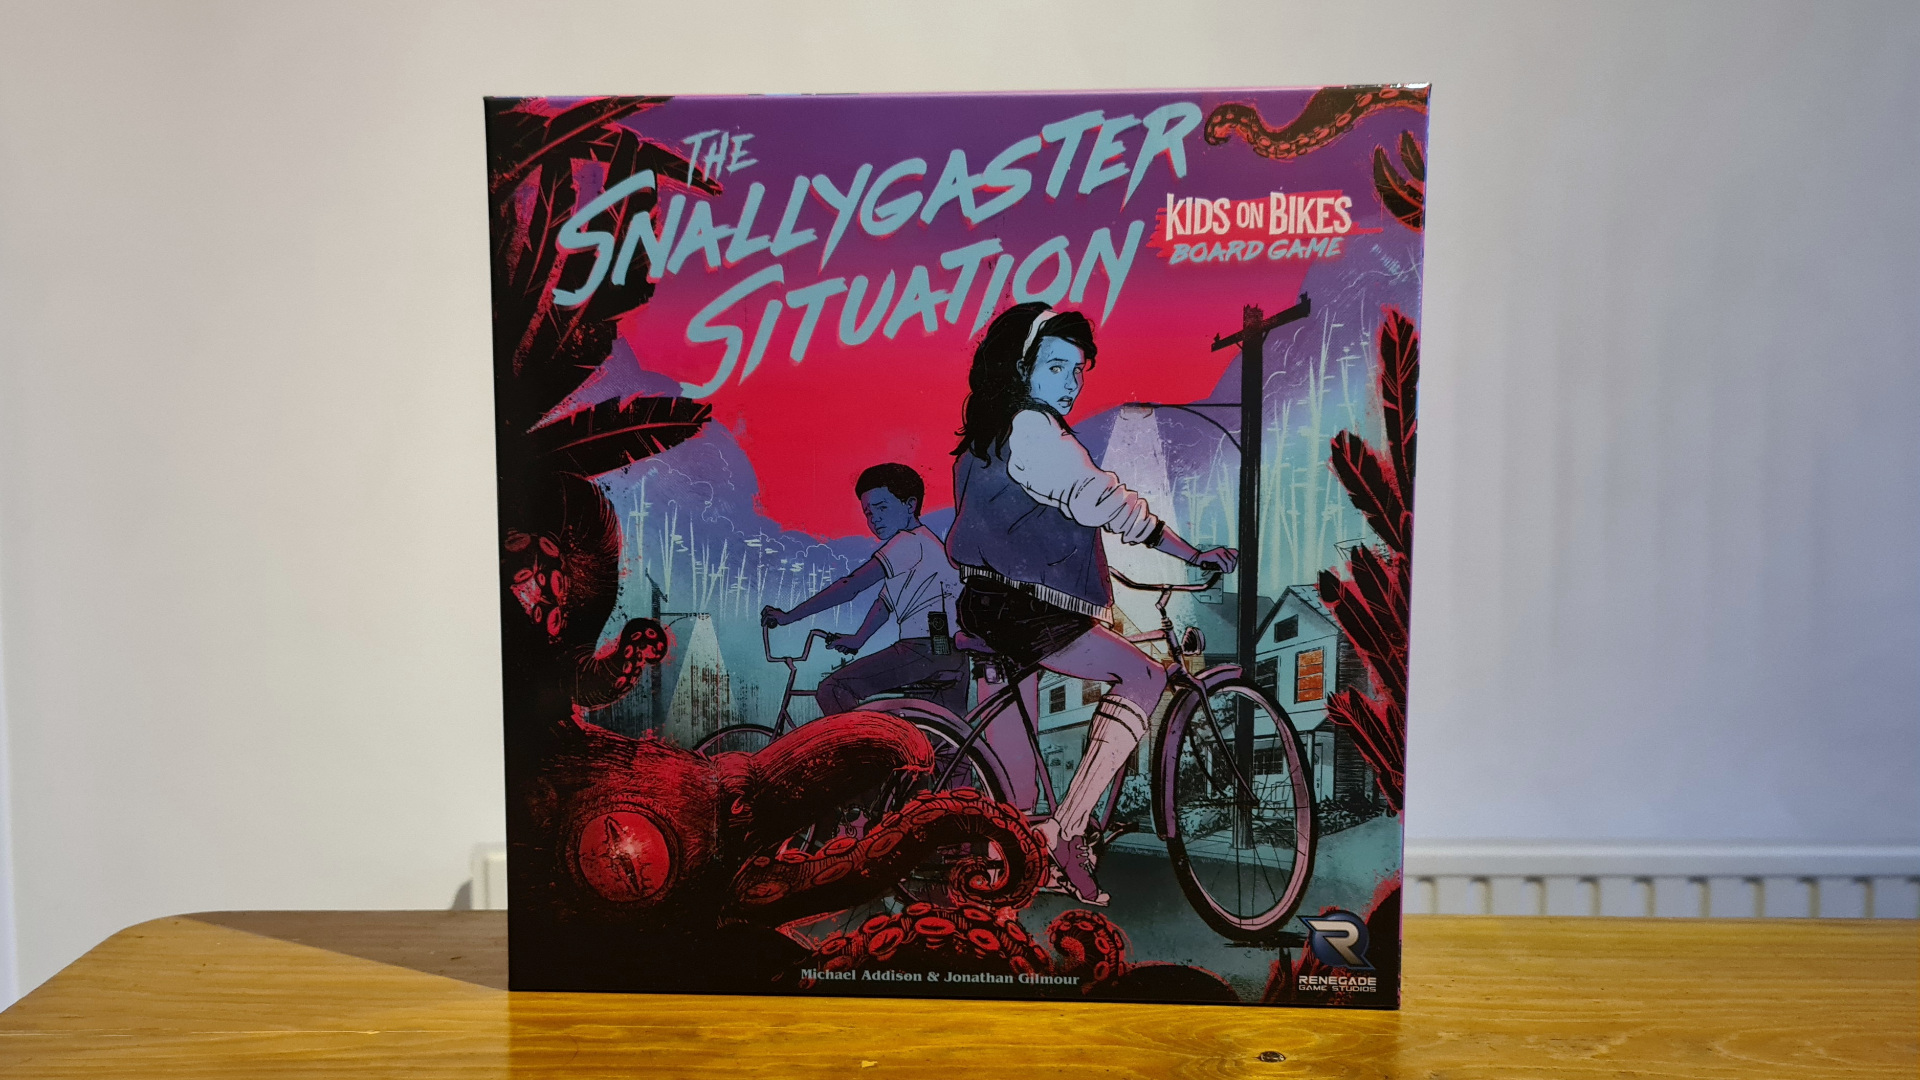 The Snallygaster Situation Review – Kids on Bikes Board Game